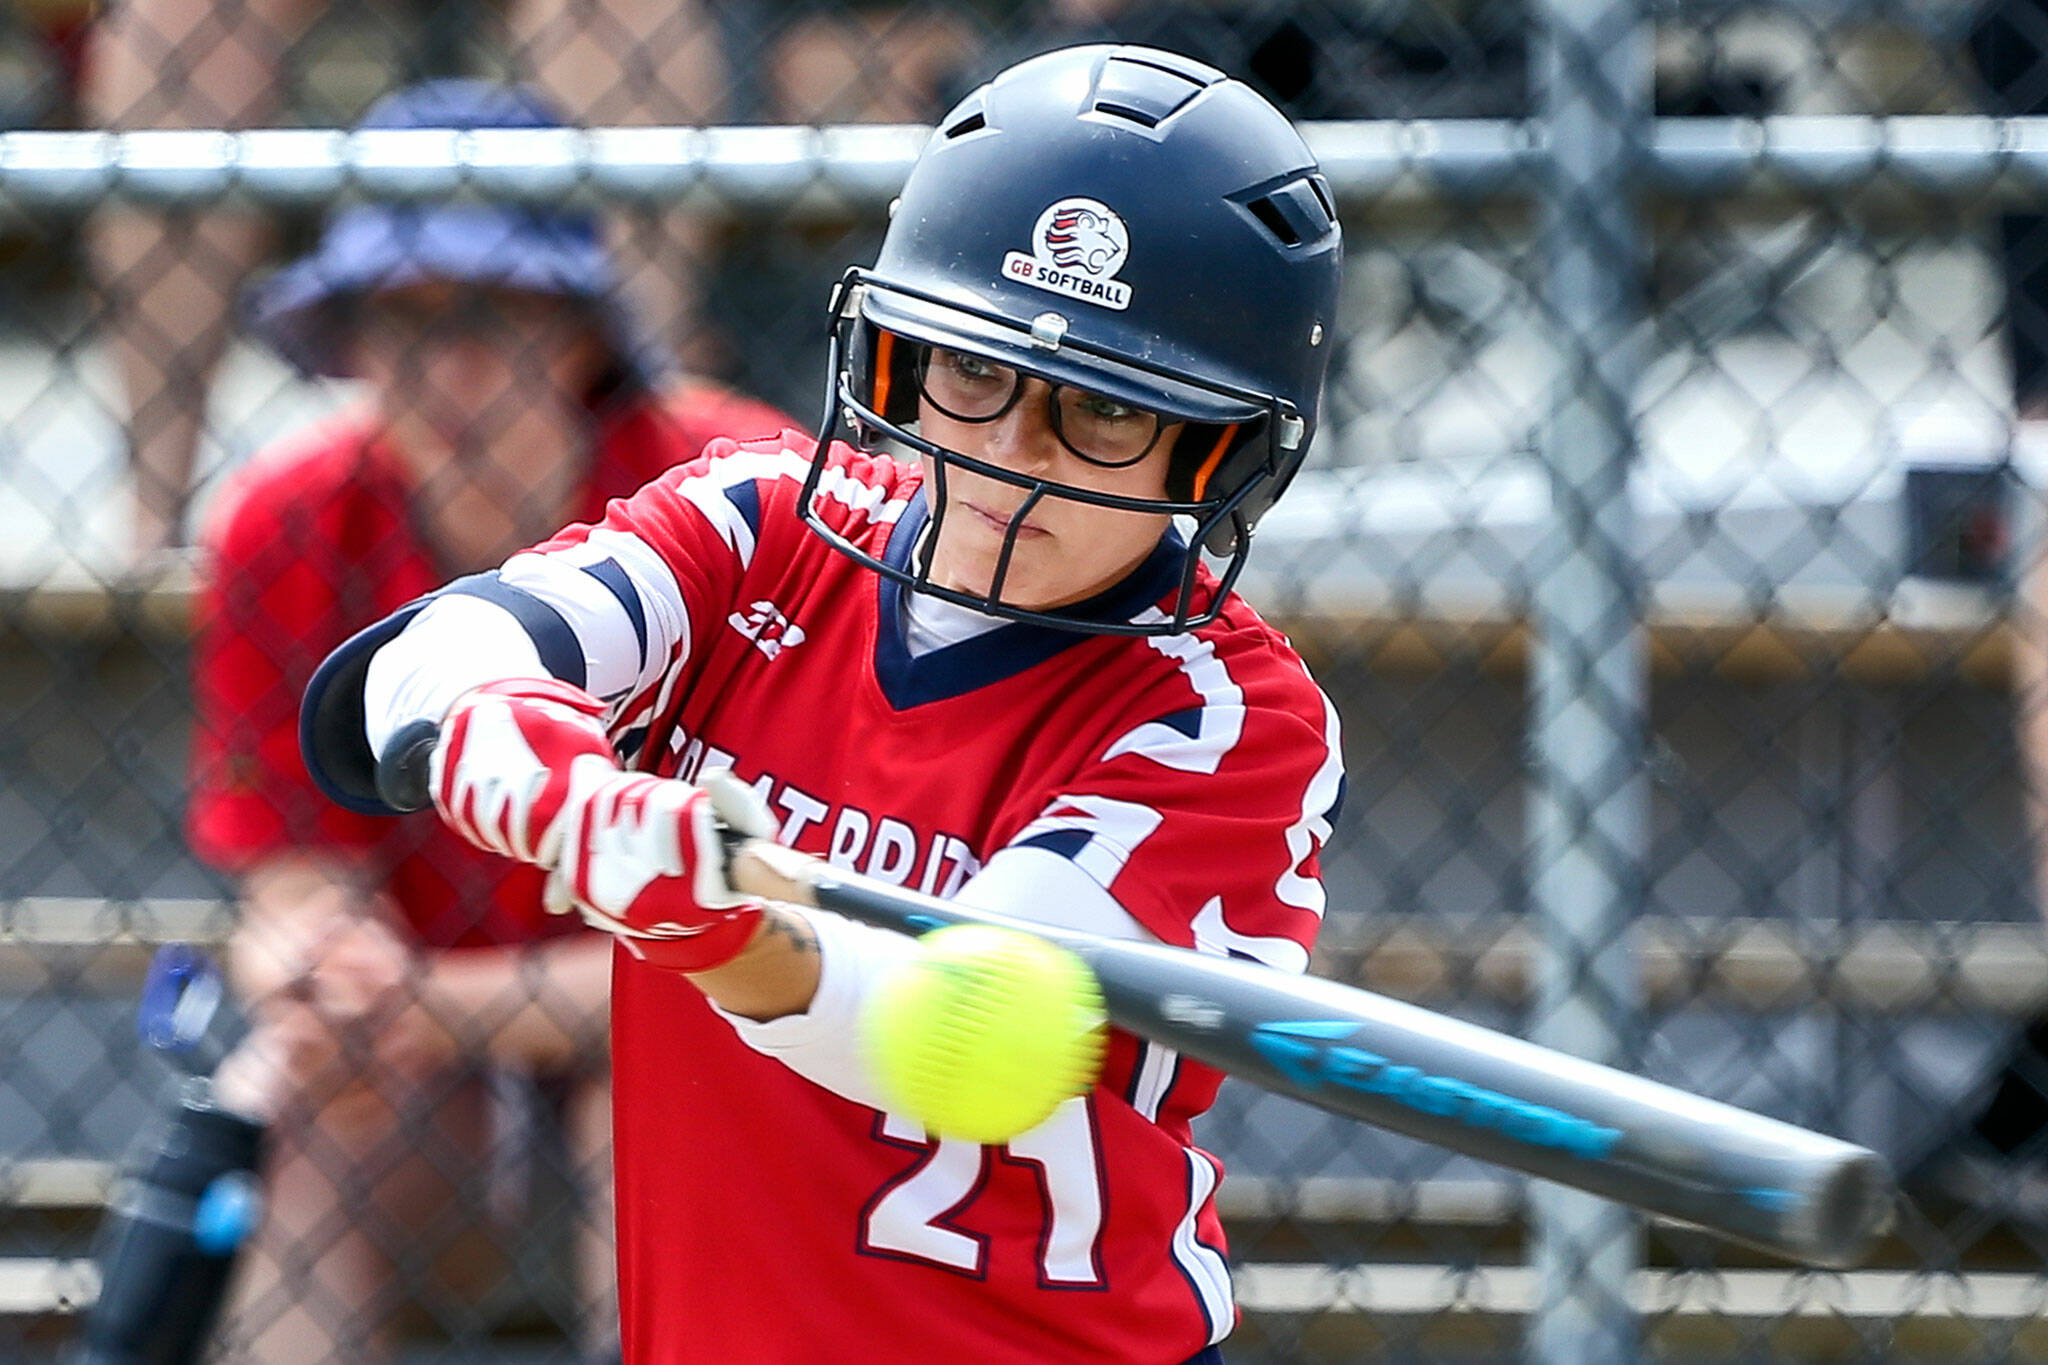 Aubrey Peterson makes a base hit during the Canada Cup Thursday morning in Surrey British Columbia on July 11, 2019. (Kevin Clark / The Herald)